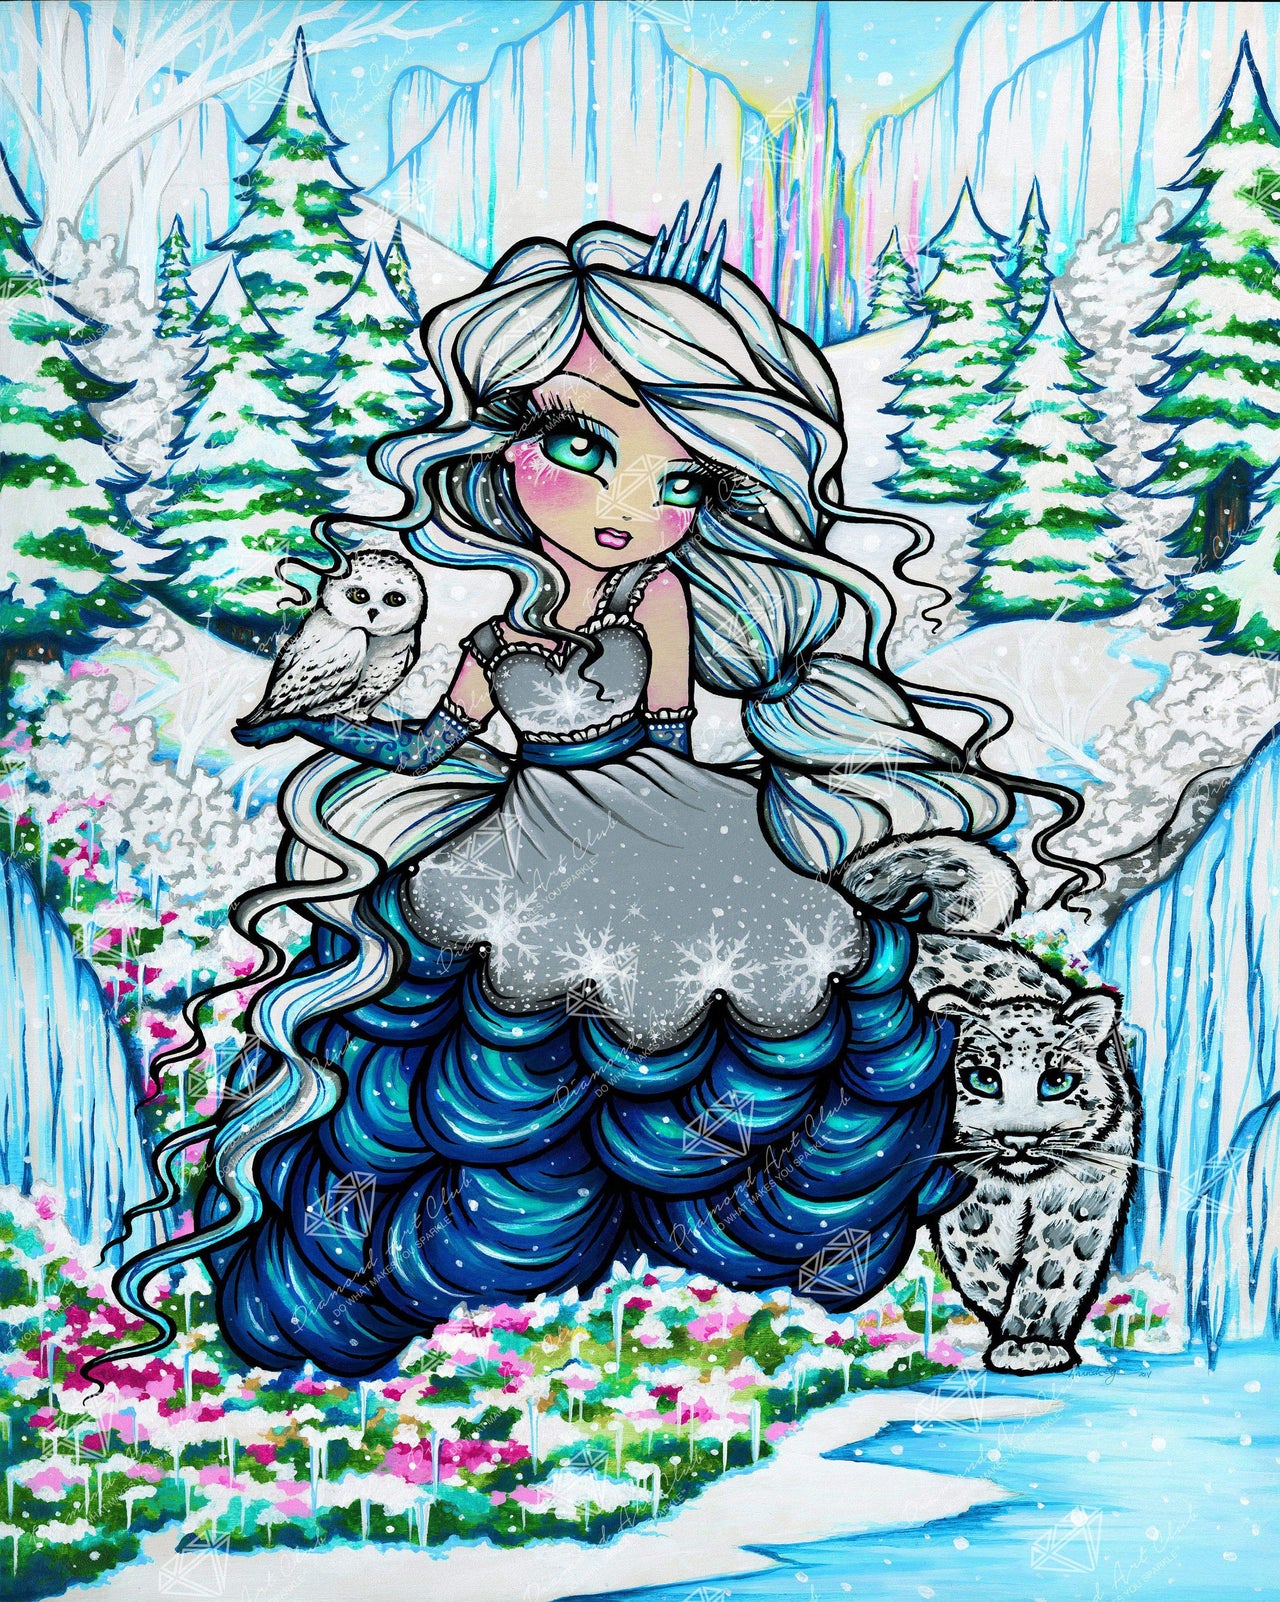 Diamond Painting Ice Princess (1st Edition) 21.7" x 27.2″ (55cm x 69cm) / Round With 28 Colors Including 3 ABs / 47580